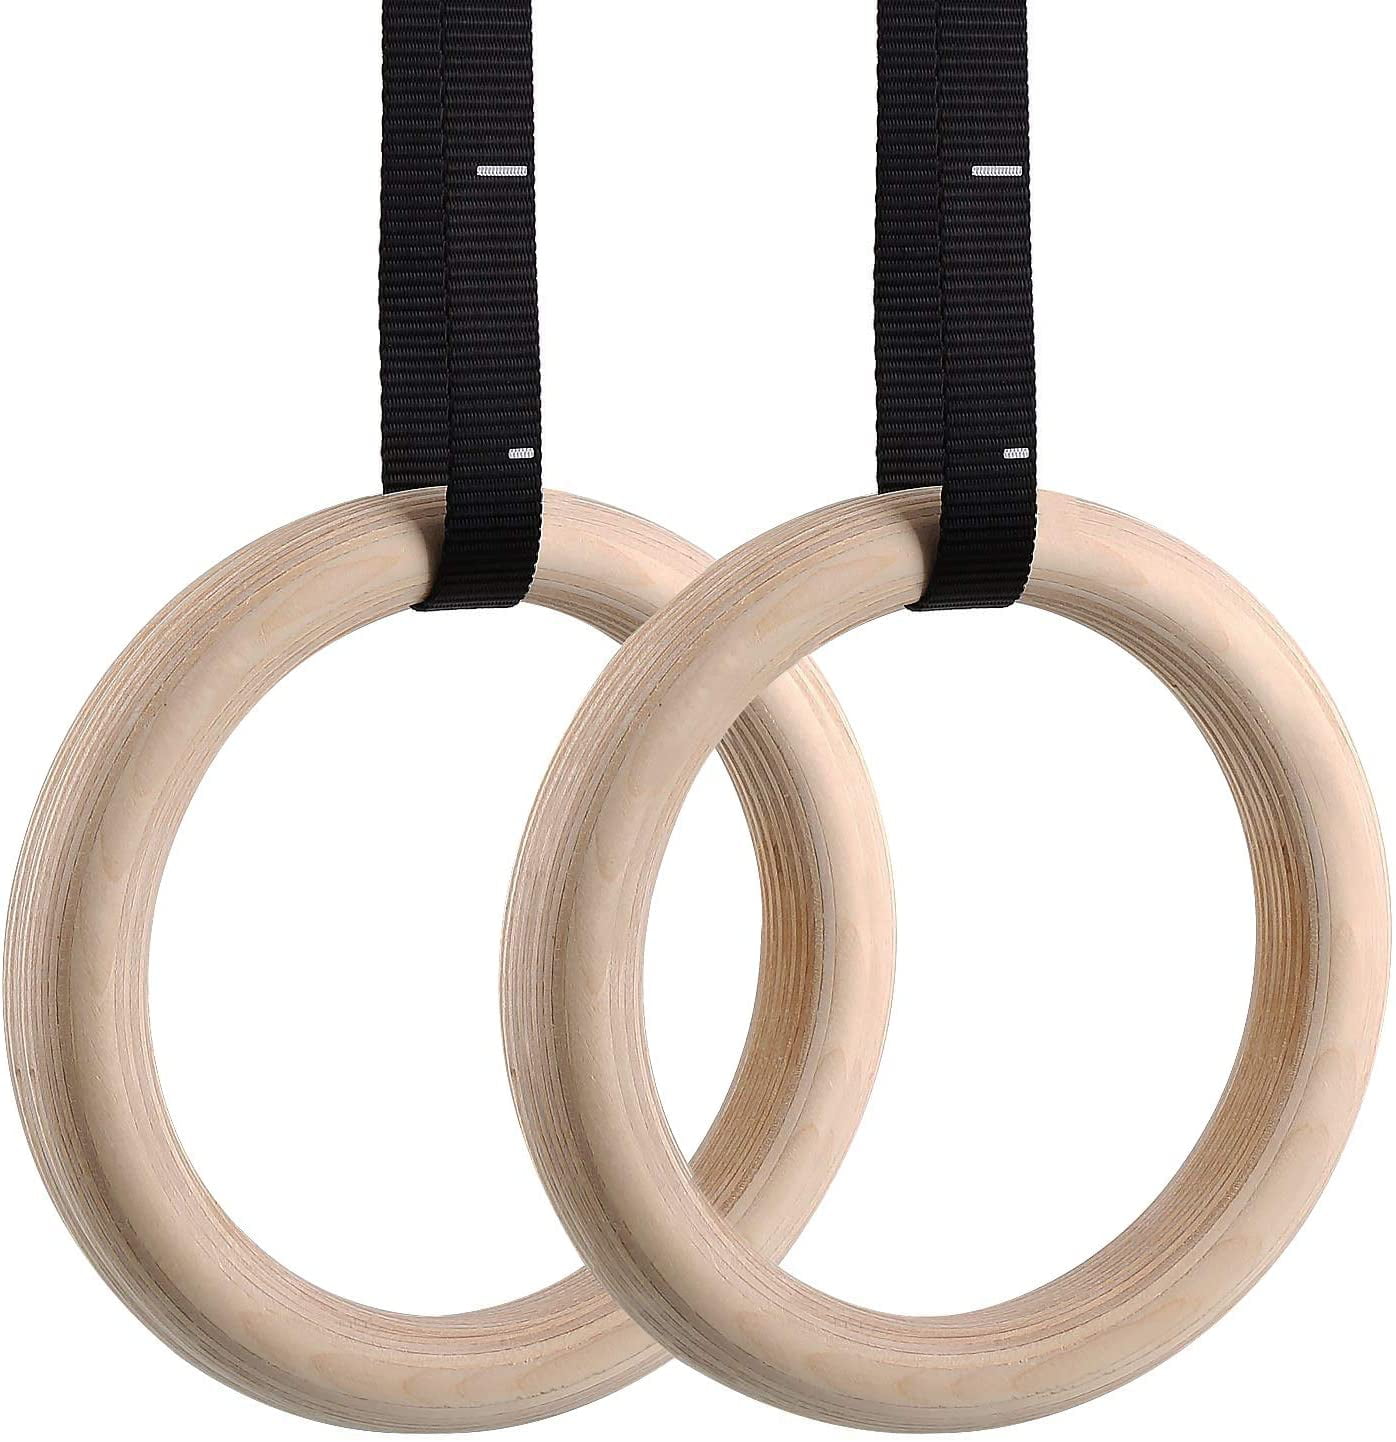 Gymnastic Olympic Gym Ring Fitness Birch Wood Gym Ring Muscle Strength Training Accessory 